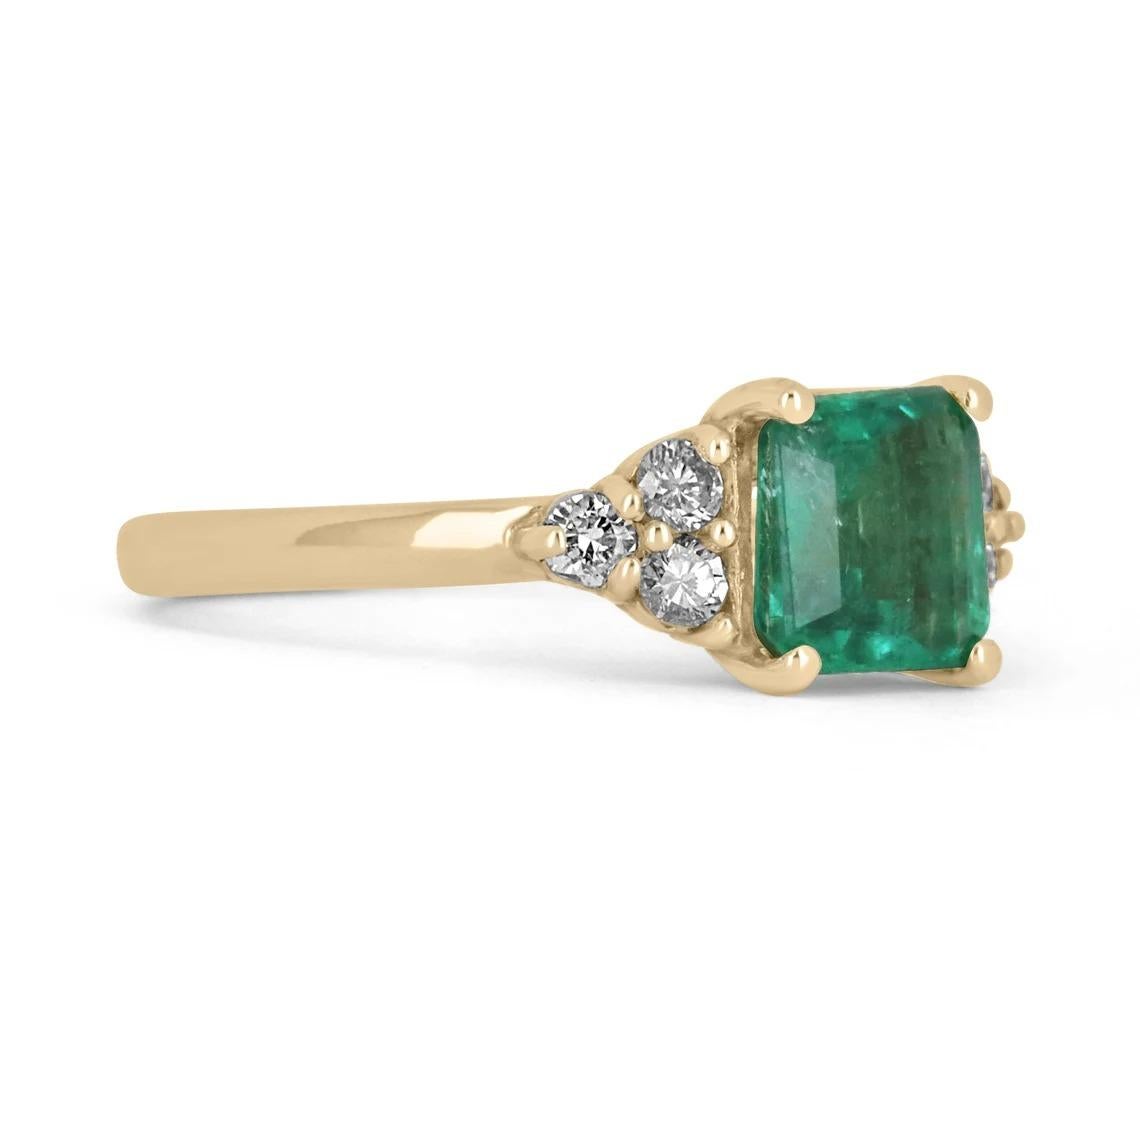 This ring features a 1.10-carat natural Colombian emerald, pear cut from the famous Muzo mines. Set in a secure two-prong setting, this extraordinary emerald has a stunning green color and very good eye clarity, Minor imperfections are normal for